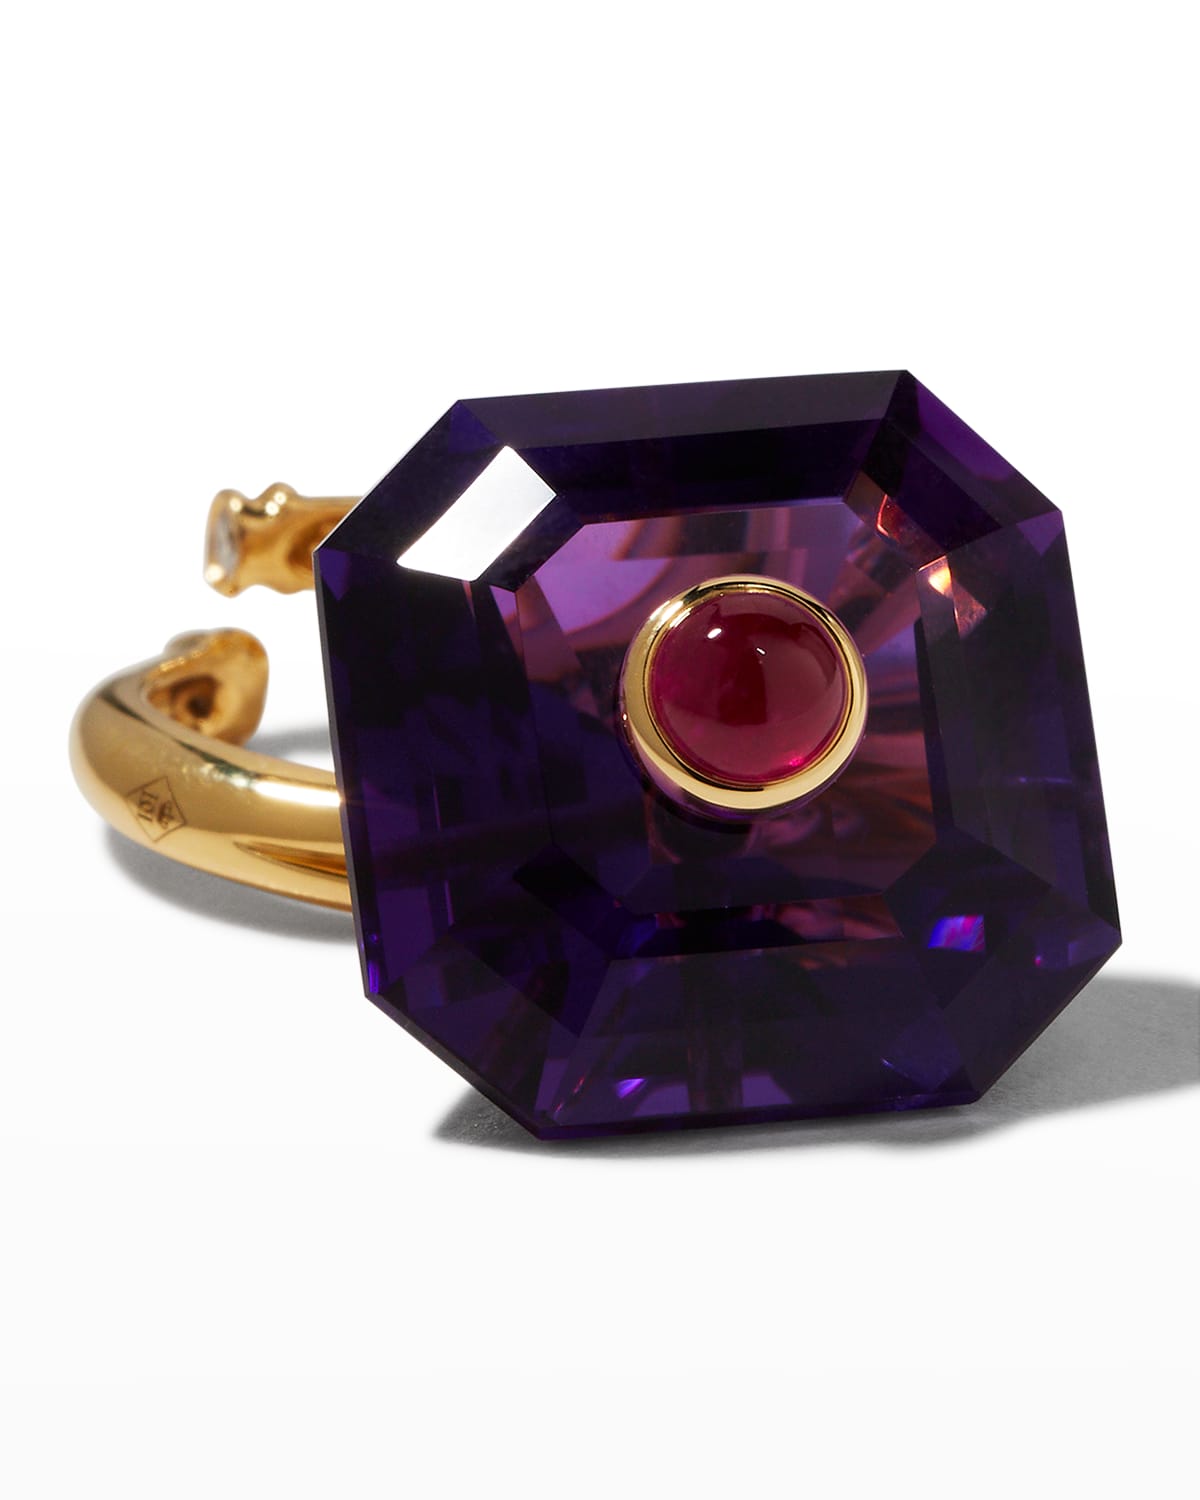 18k Rose Gold Amethyst Ring with Diamonds, Size 6